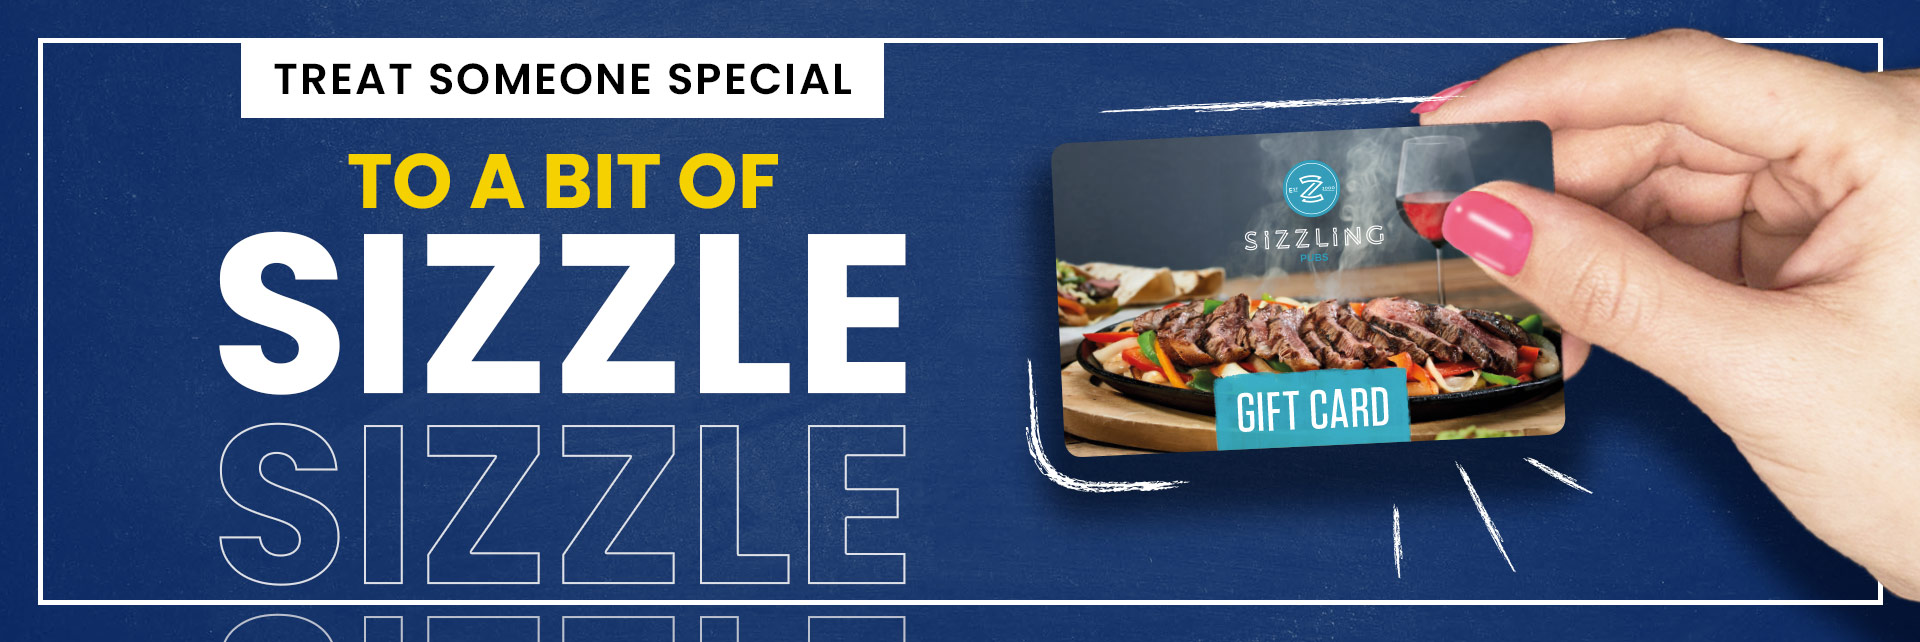 Sizzling Pubs Gift Card at The Robin's Nest in Edinburgh